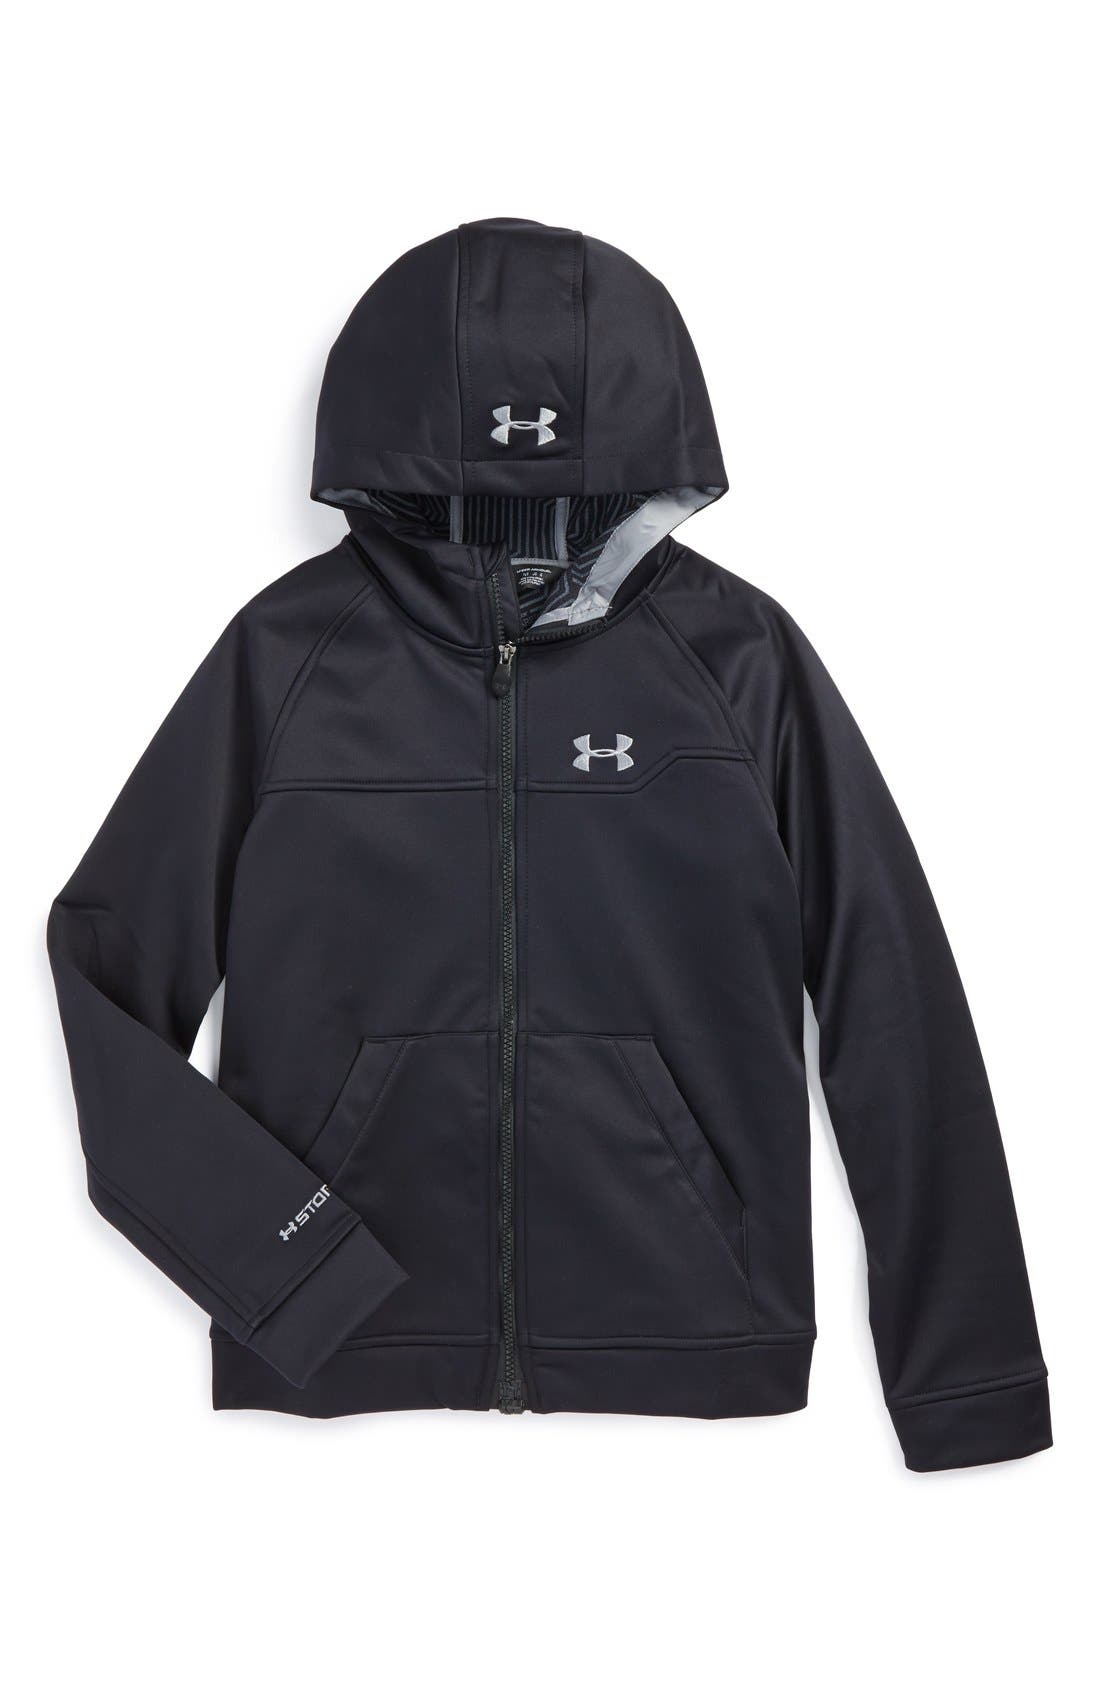 under armour storm jacket youth